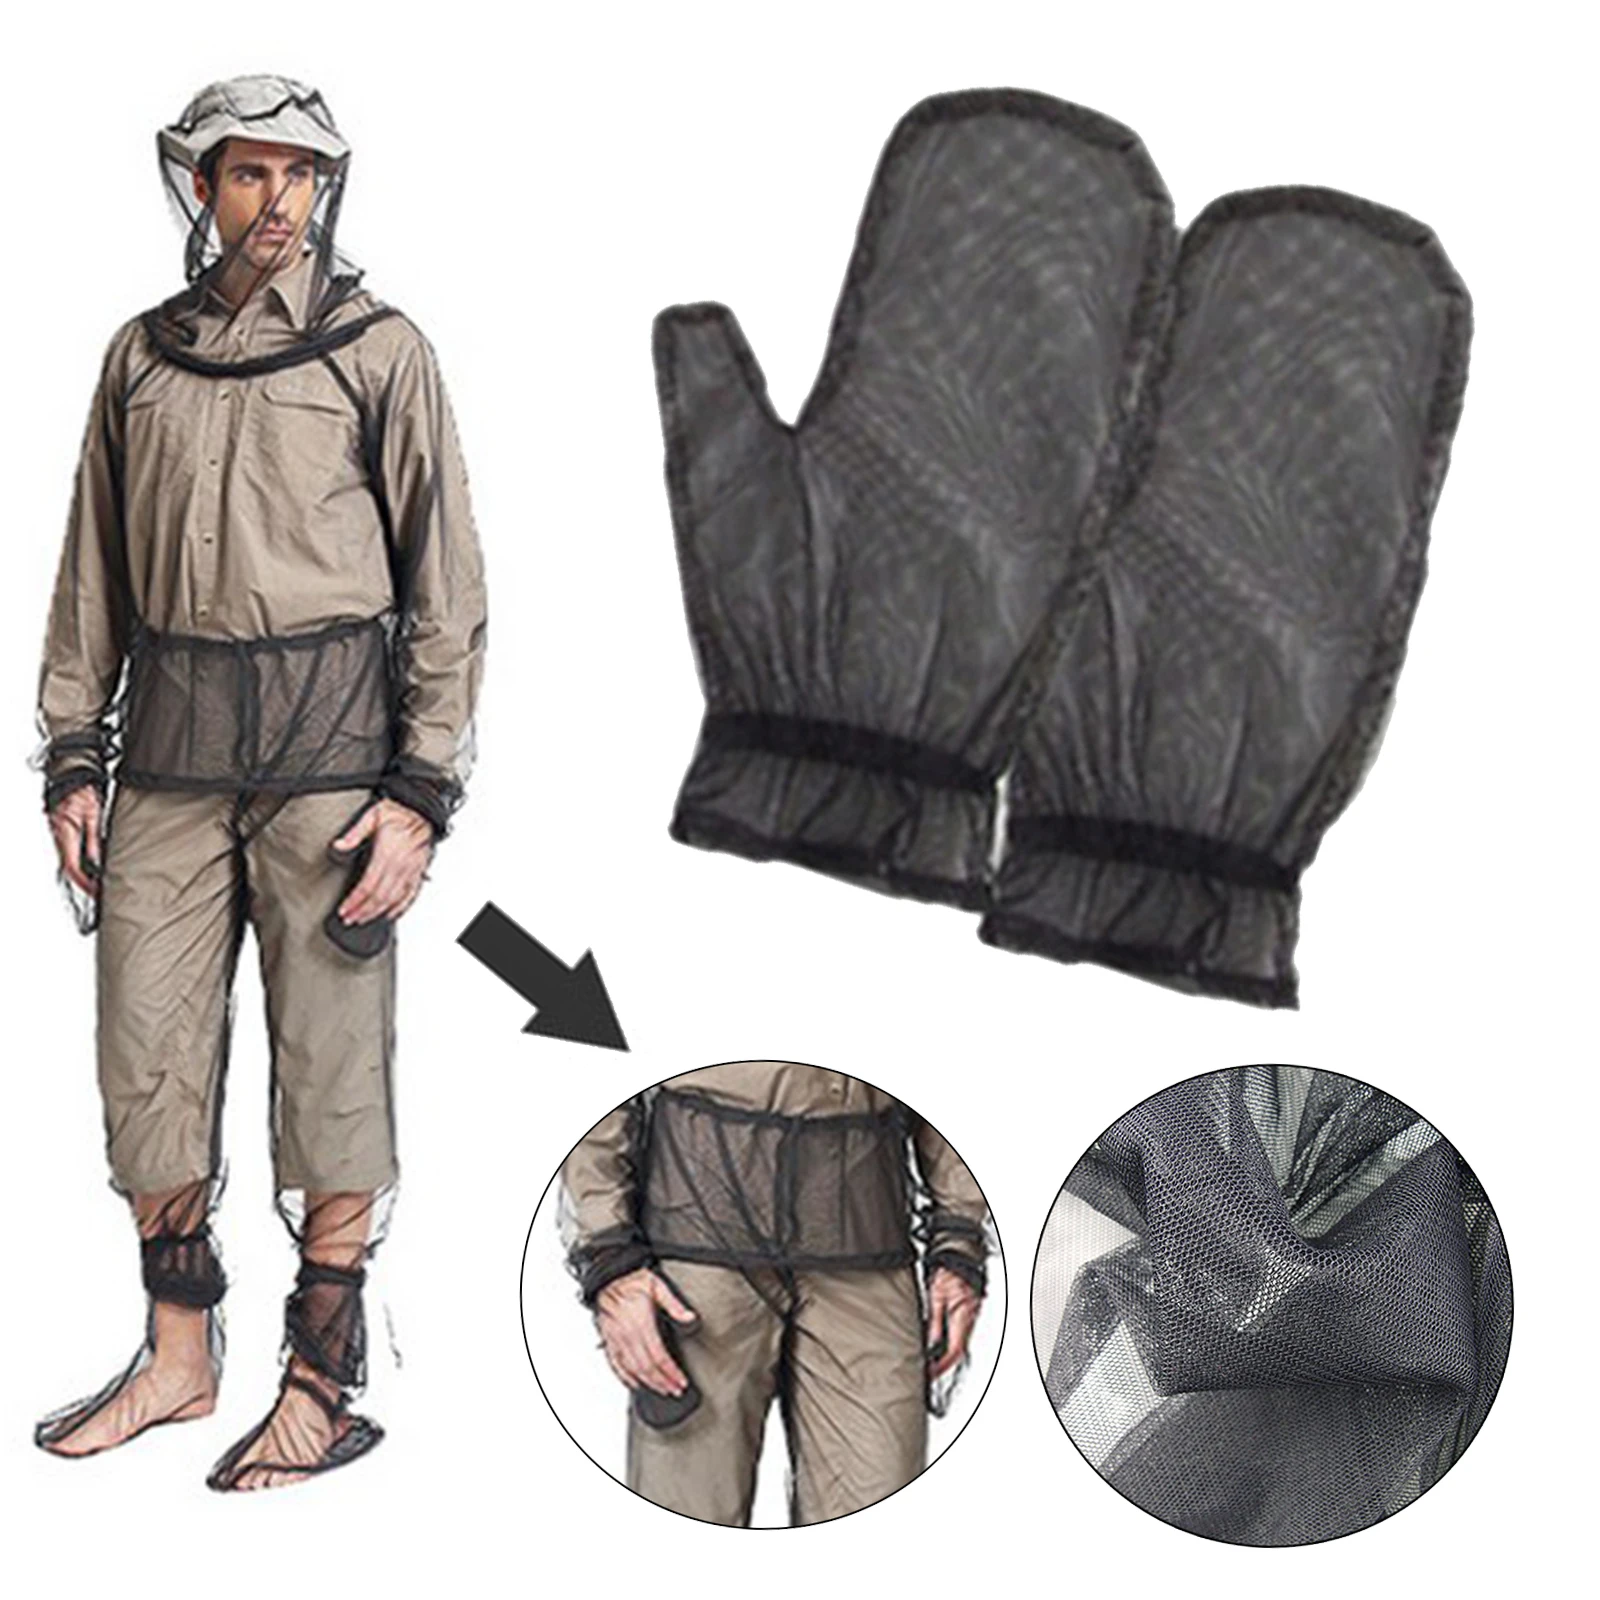 Unisex Fishing Clothes Mesh Hood Mosquito Repellent Suit Anti Mosquito Clothes Insect-proof Jacket Set for Outdoor Protection 